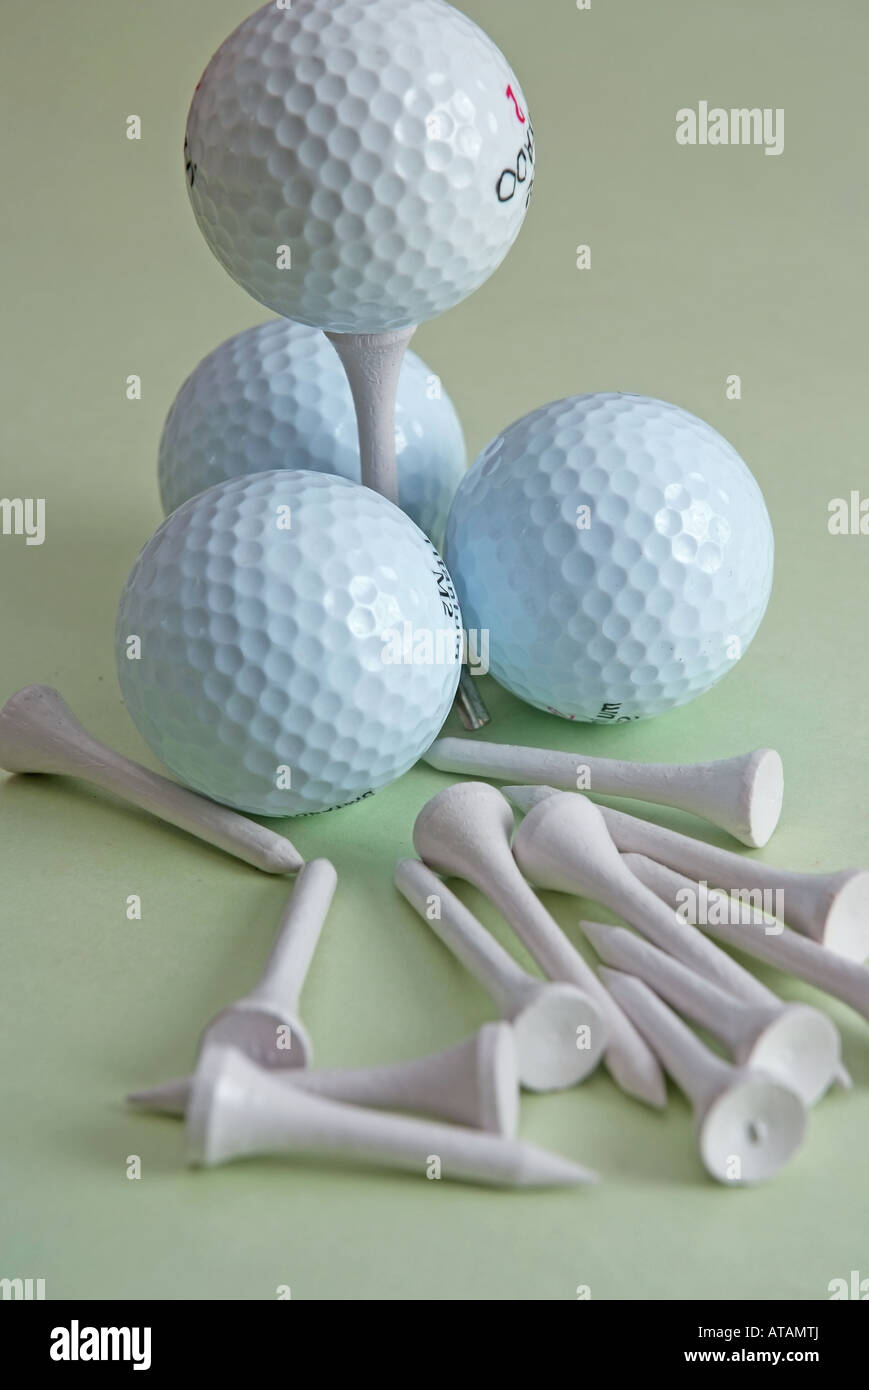 3 golfbaelle und ts trois golfballs et tees Banque D'Images